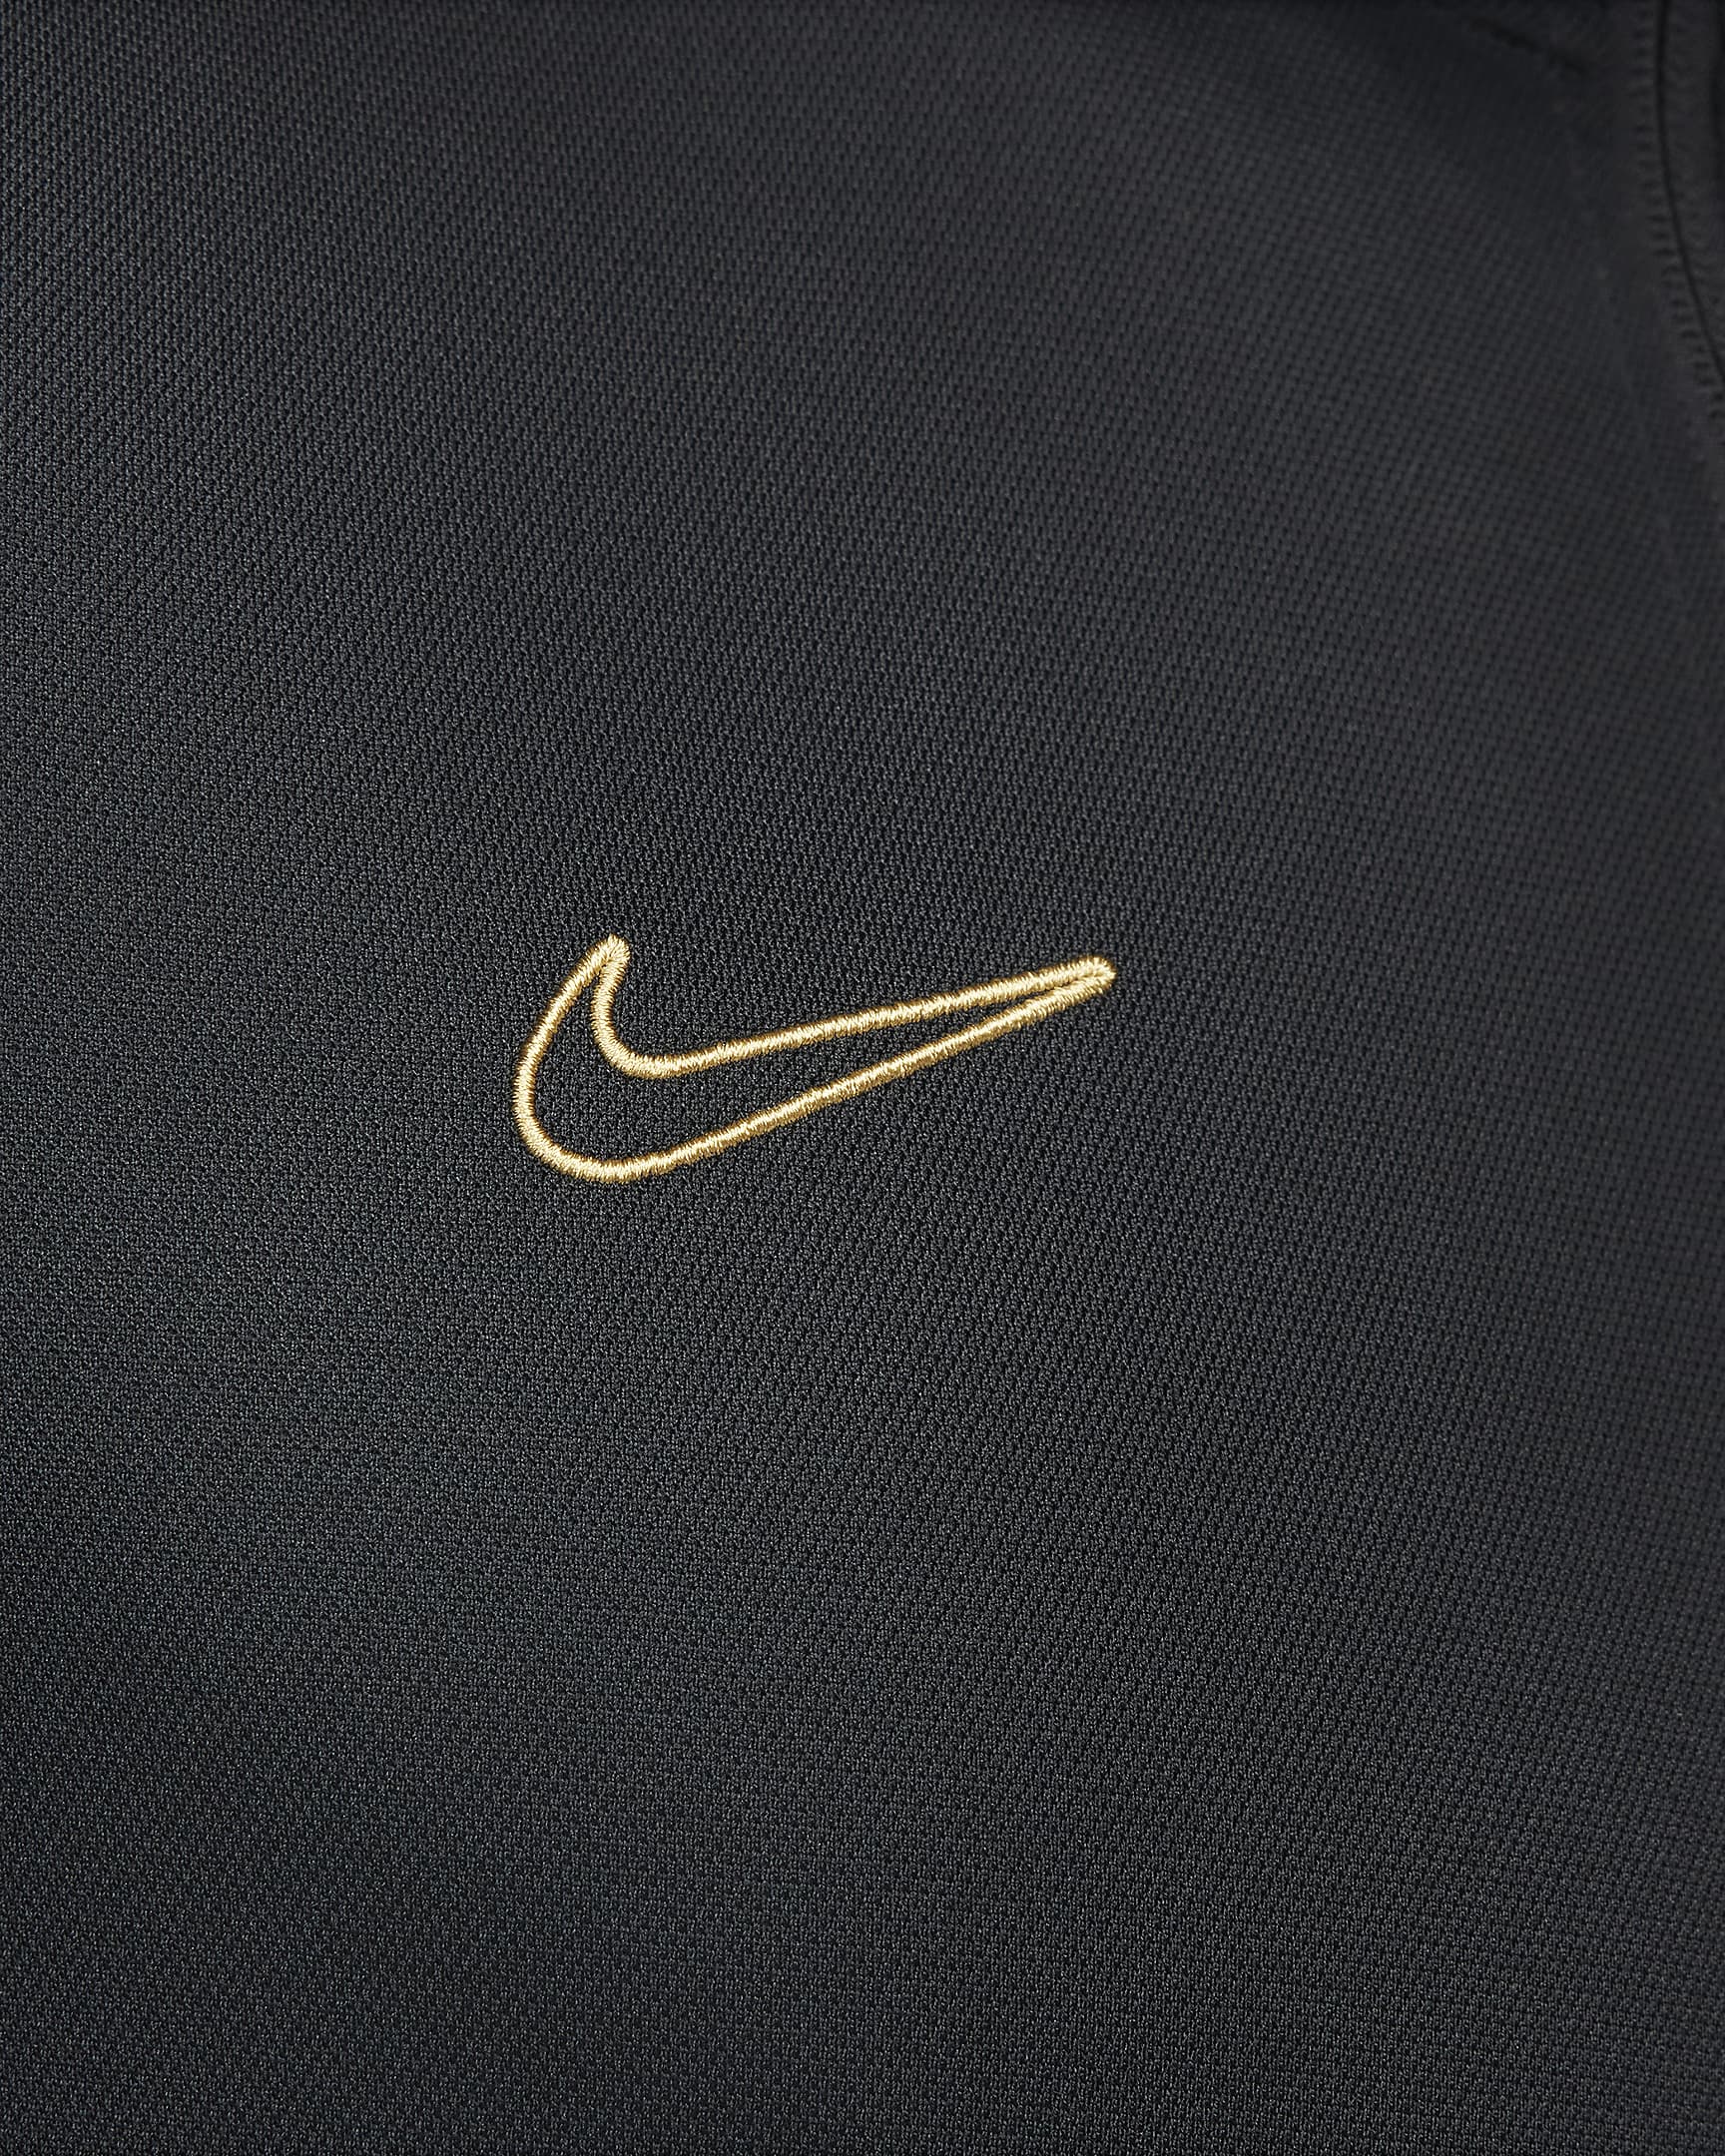 Nike Academy Men's Dri-FIT Football Tracksuit. Nike AT